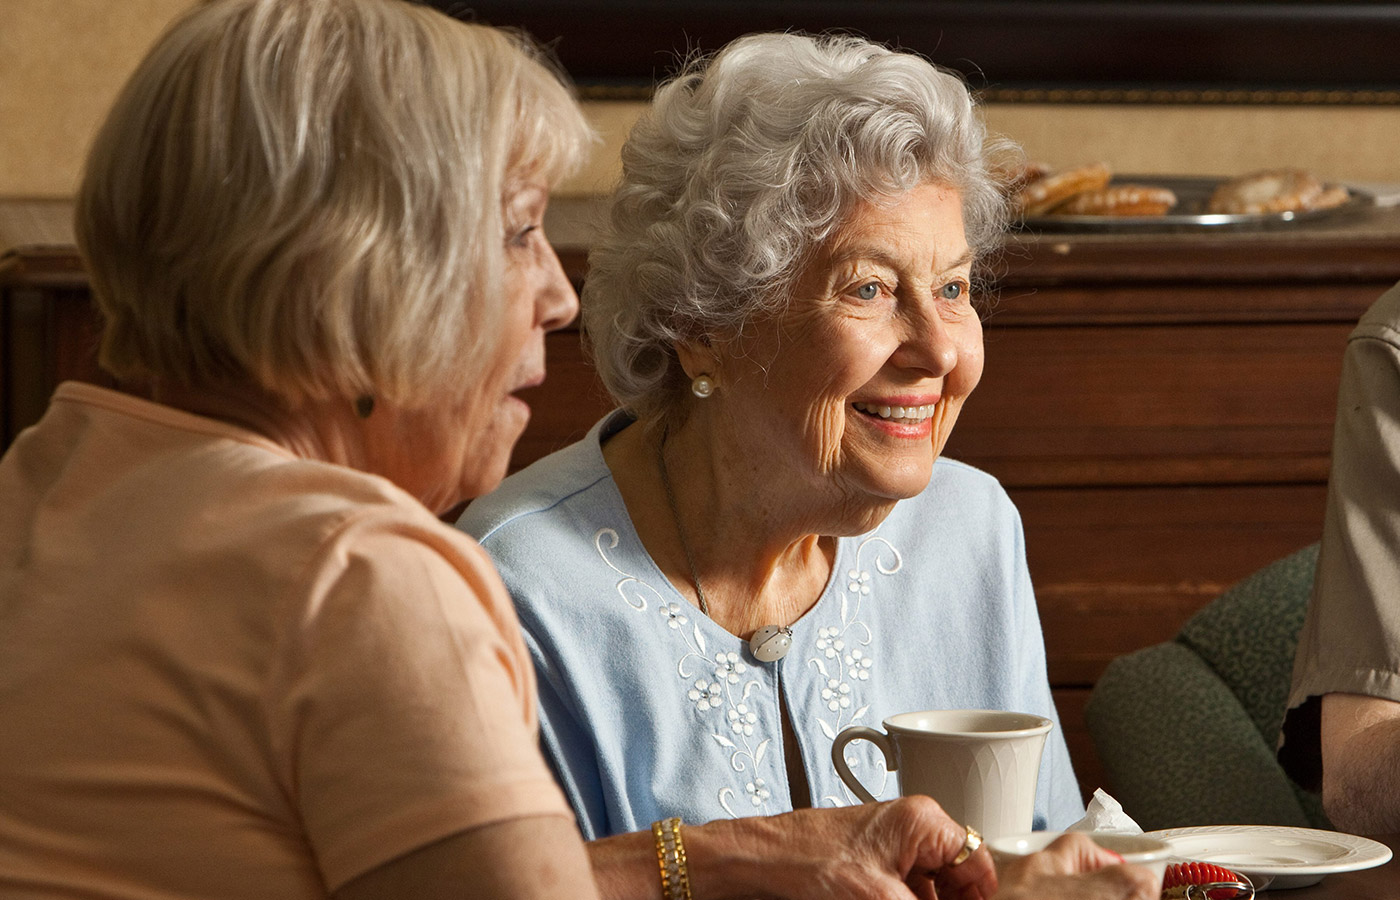 Two residents enjoy a cup of coffee.